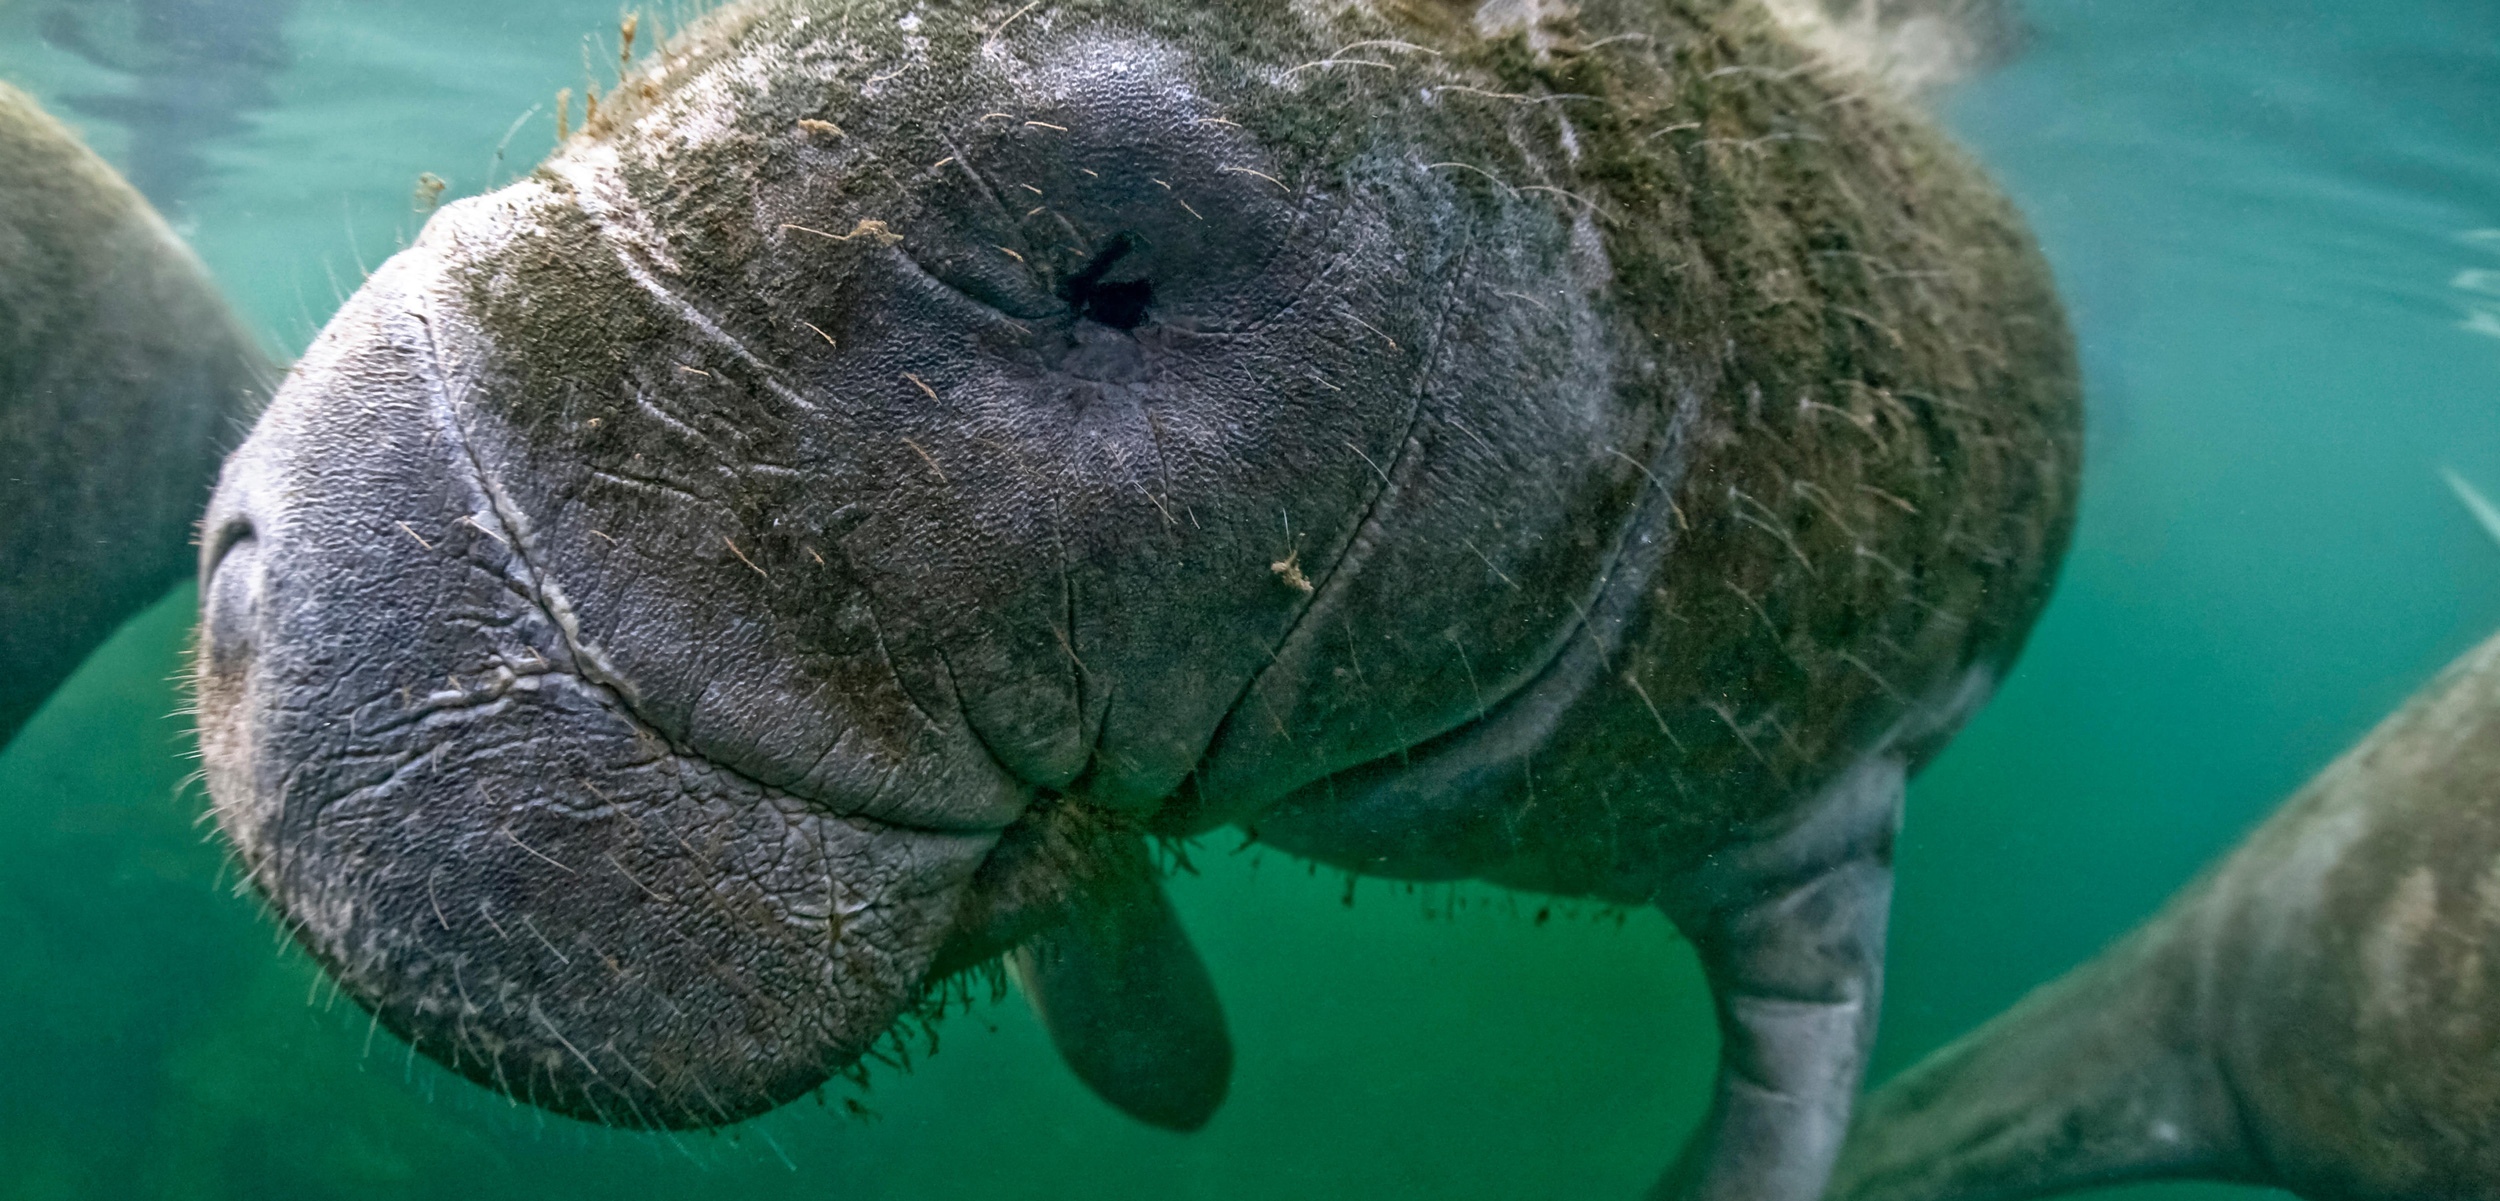 Manatees have super-sensitive whiskers, but as new research shows, that special sense of touch extends to their body hair as well. Photo by Westend61 GmbH/Alamy Stock Photo